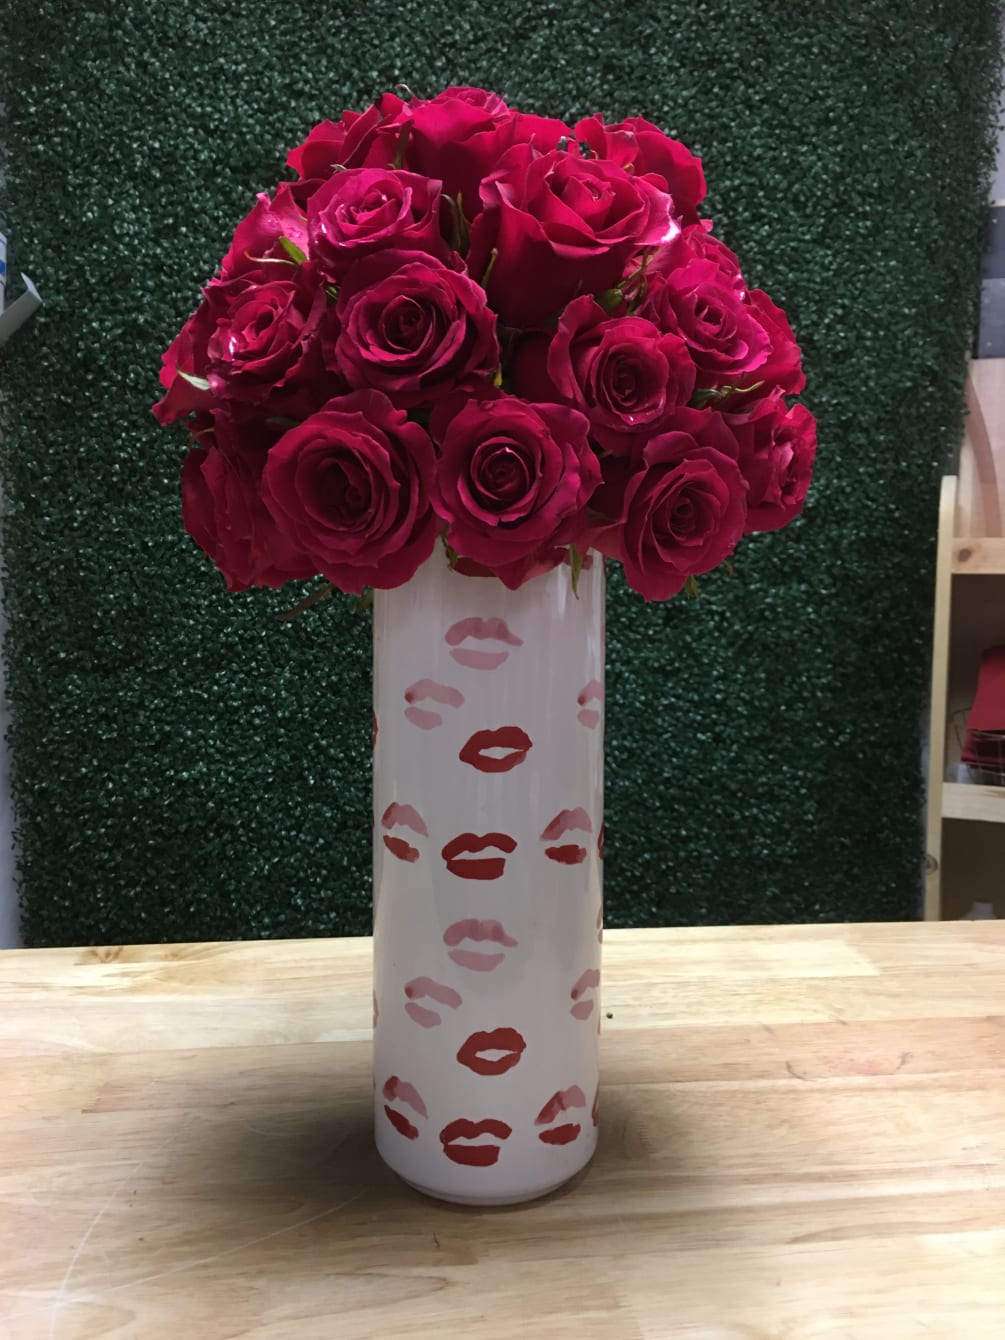 12 Roses atop a tall vases adorned with kisses.

SUBSITUTION POLICY
In many instances